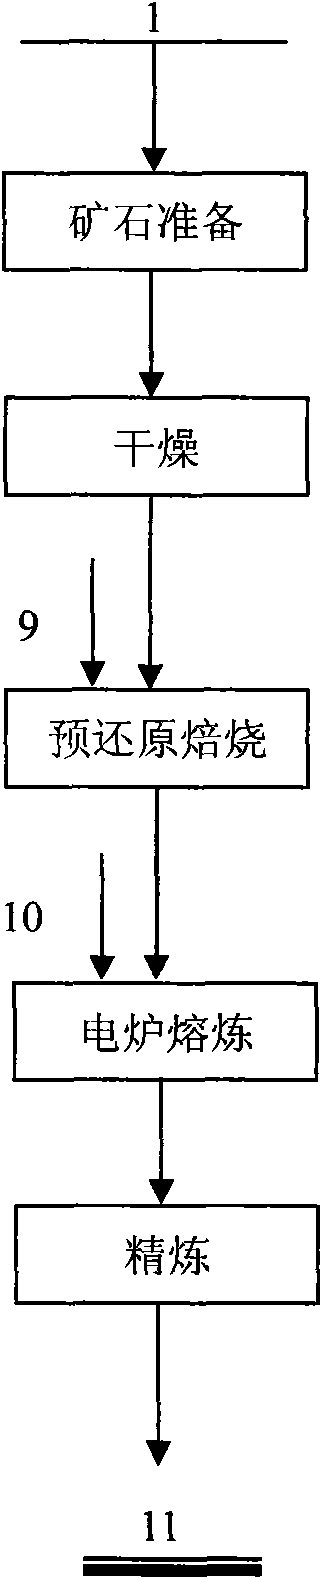 Method for comprehensively utilizing laterite-type nickel ore